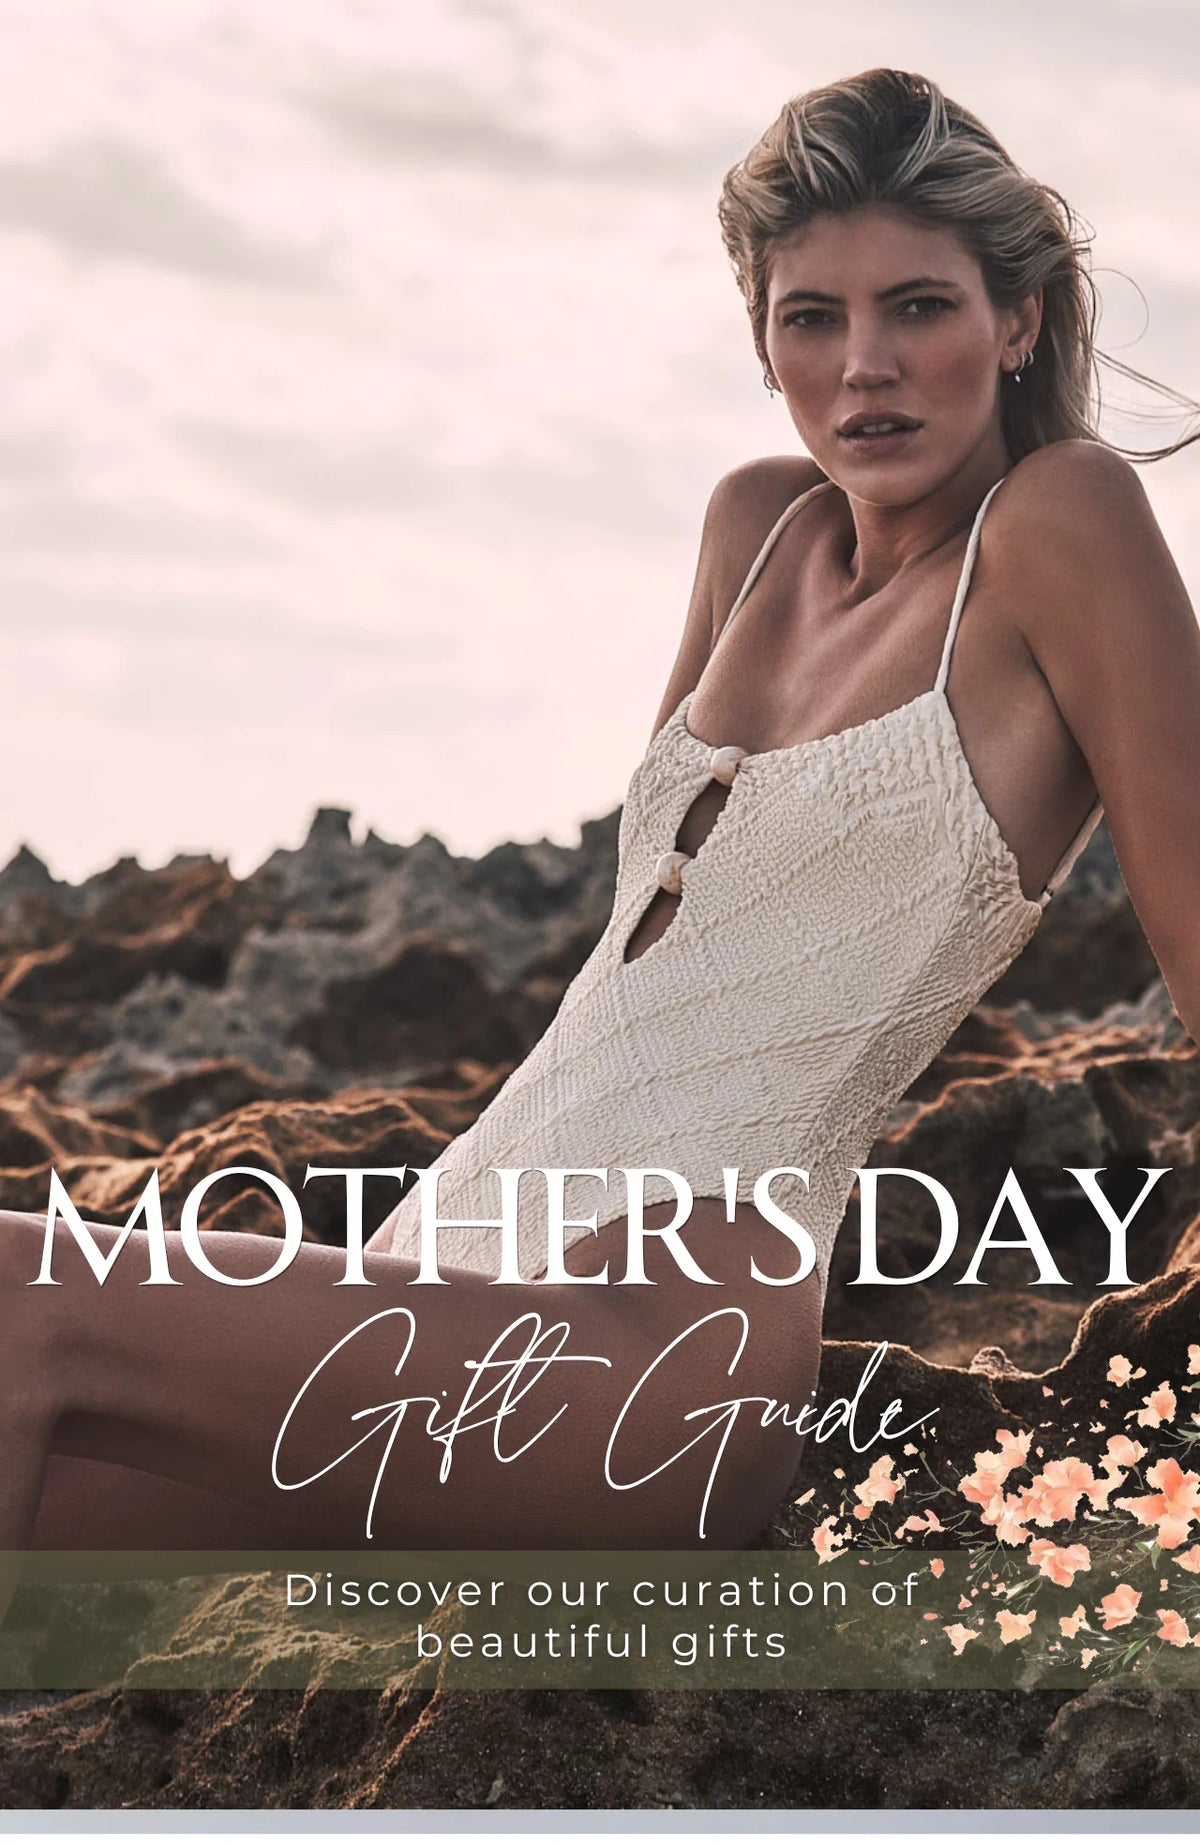 Mother's Day Gift Guide - Discover our curation of beautiful gifts